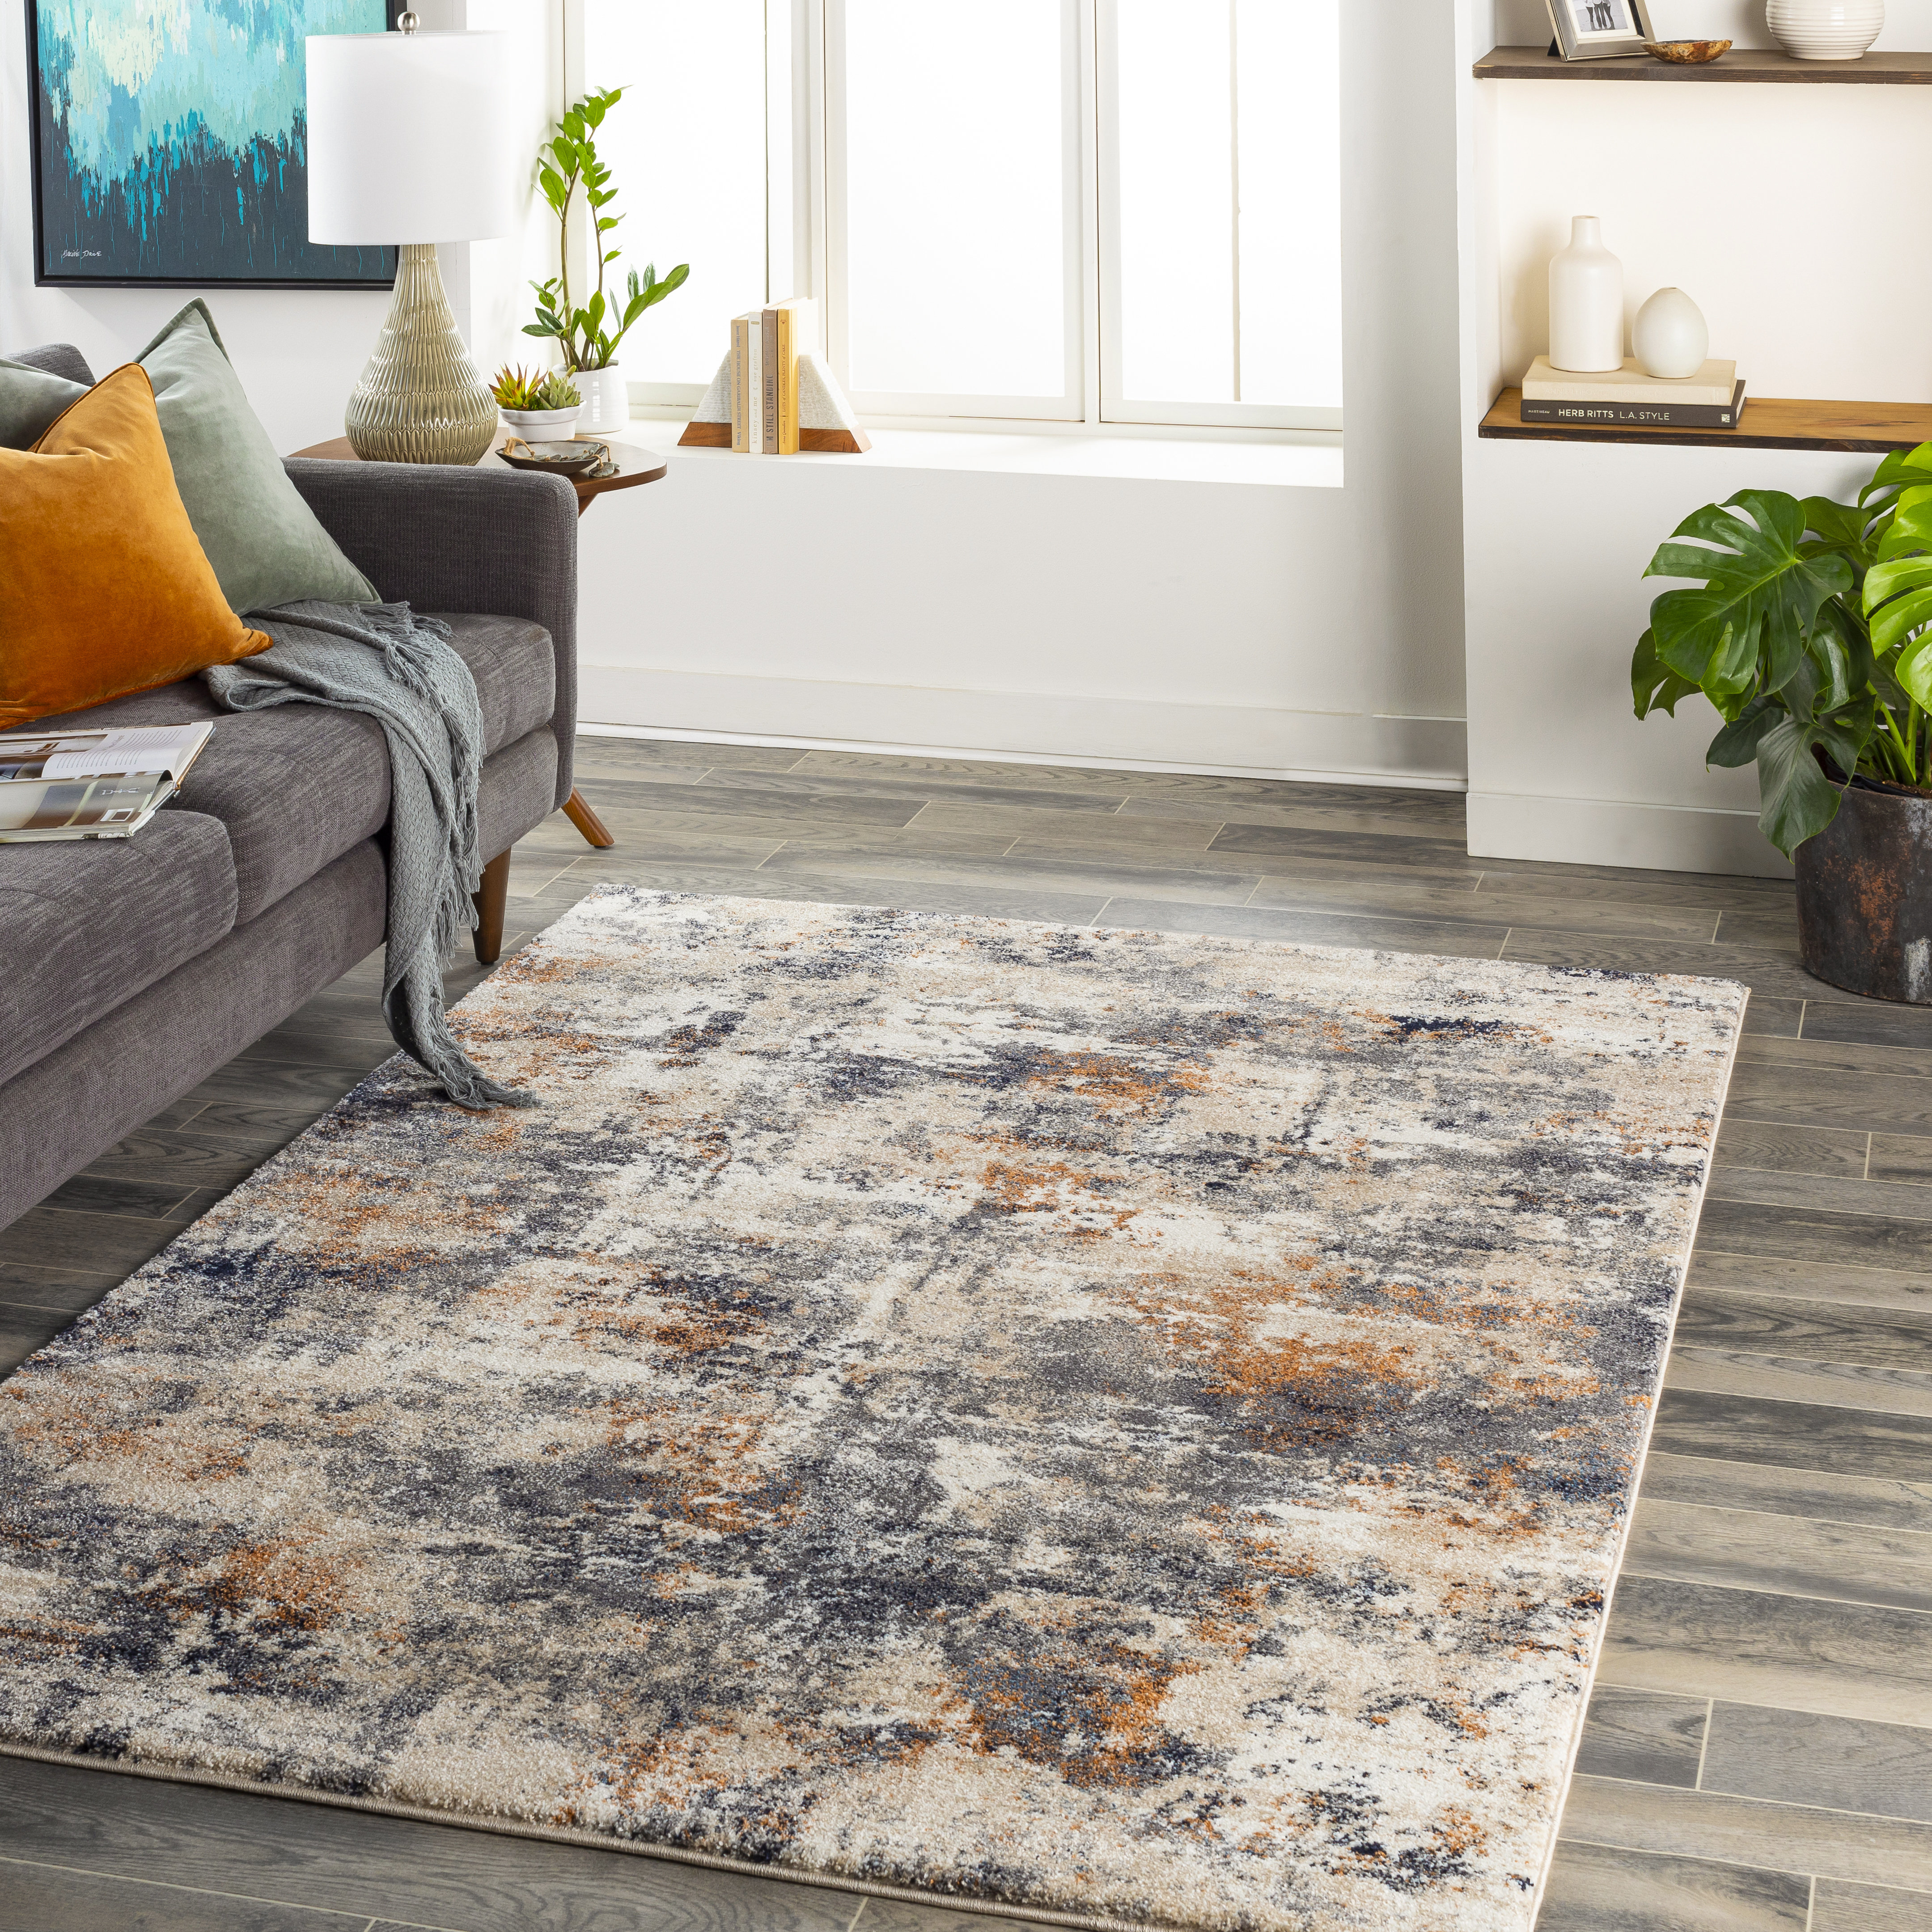 Rickert Abstract Area Rug Williston Forge Rug Size: Rectangle 6'7 x 9'6